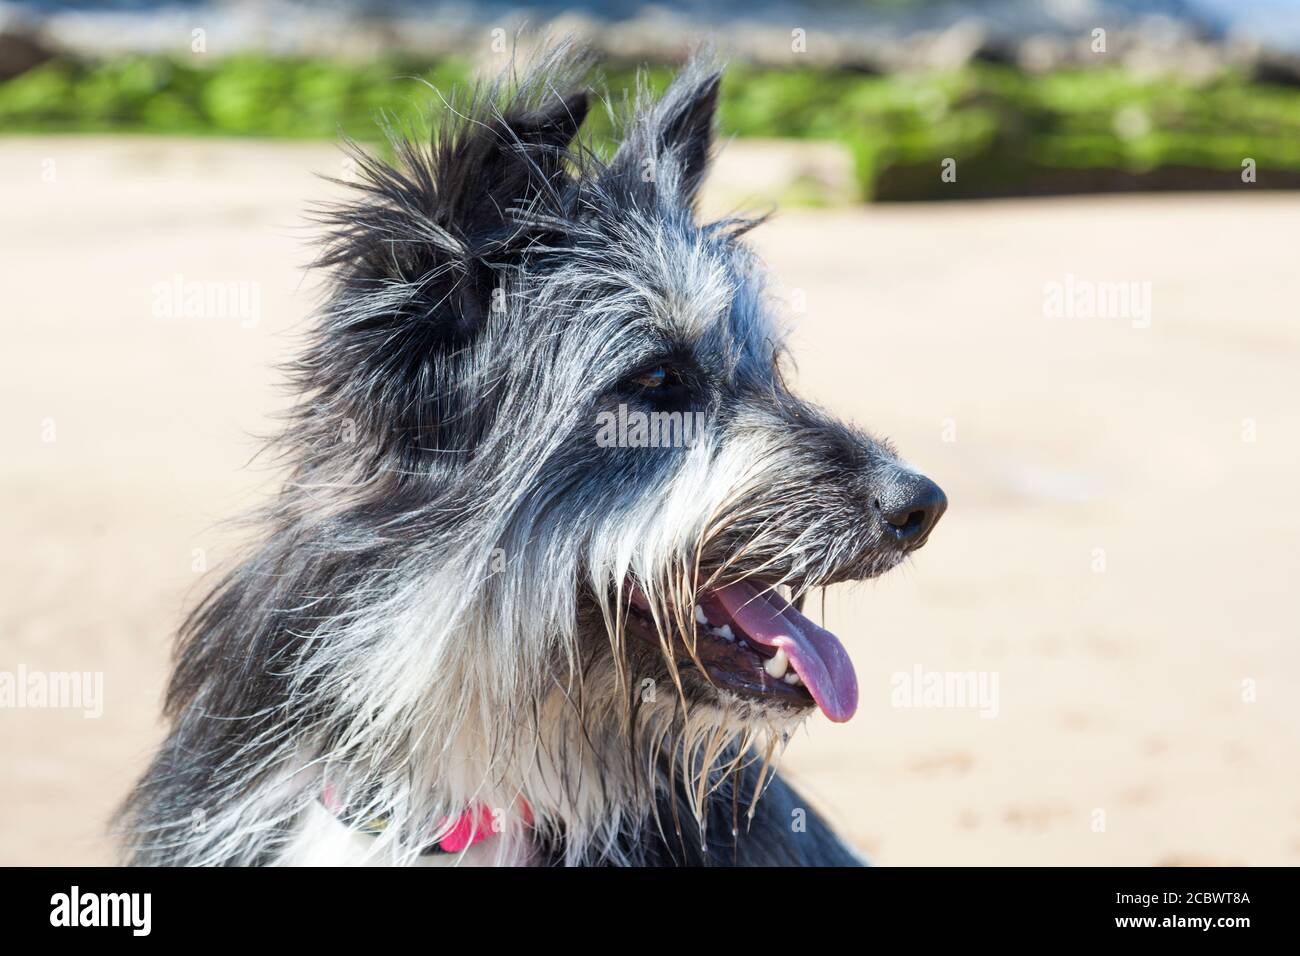 Side view of hairy black and white dog, with its tongue out Stock Photo